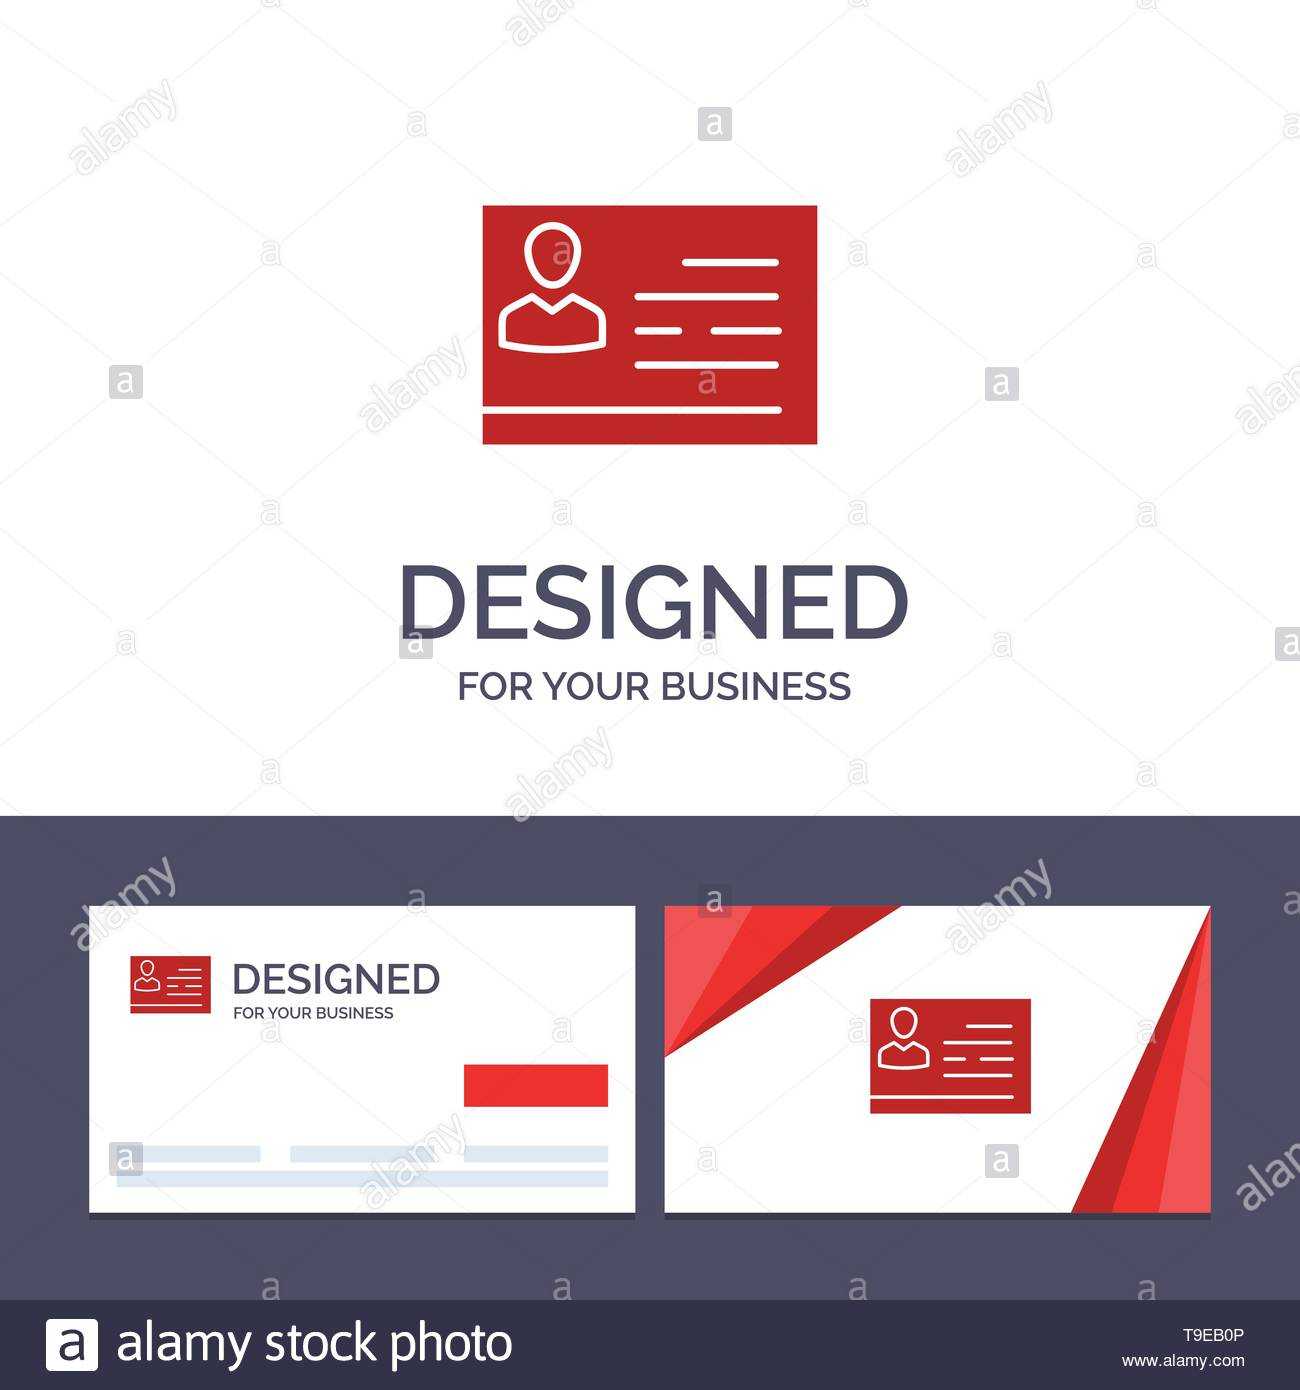 Personal Id Card Stock Photos & Personal Id Card Stock Inside Personal Identification Card Template